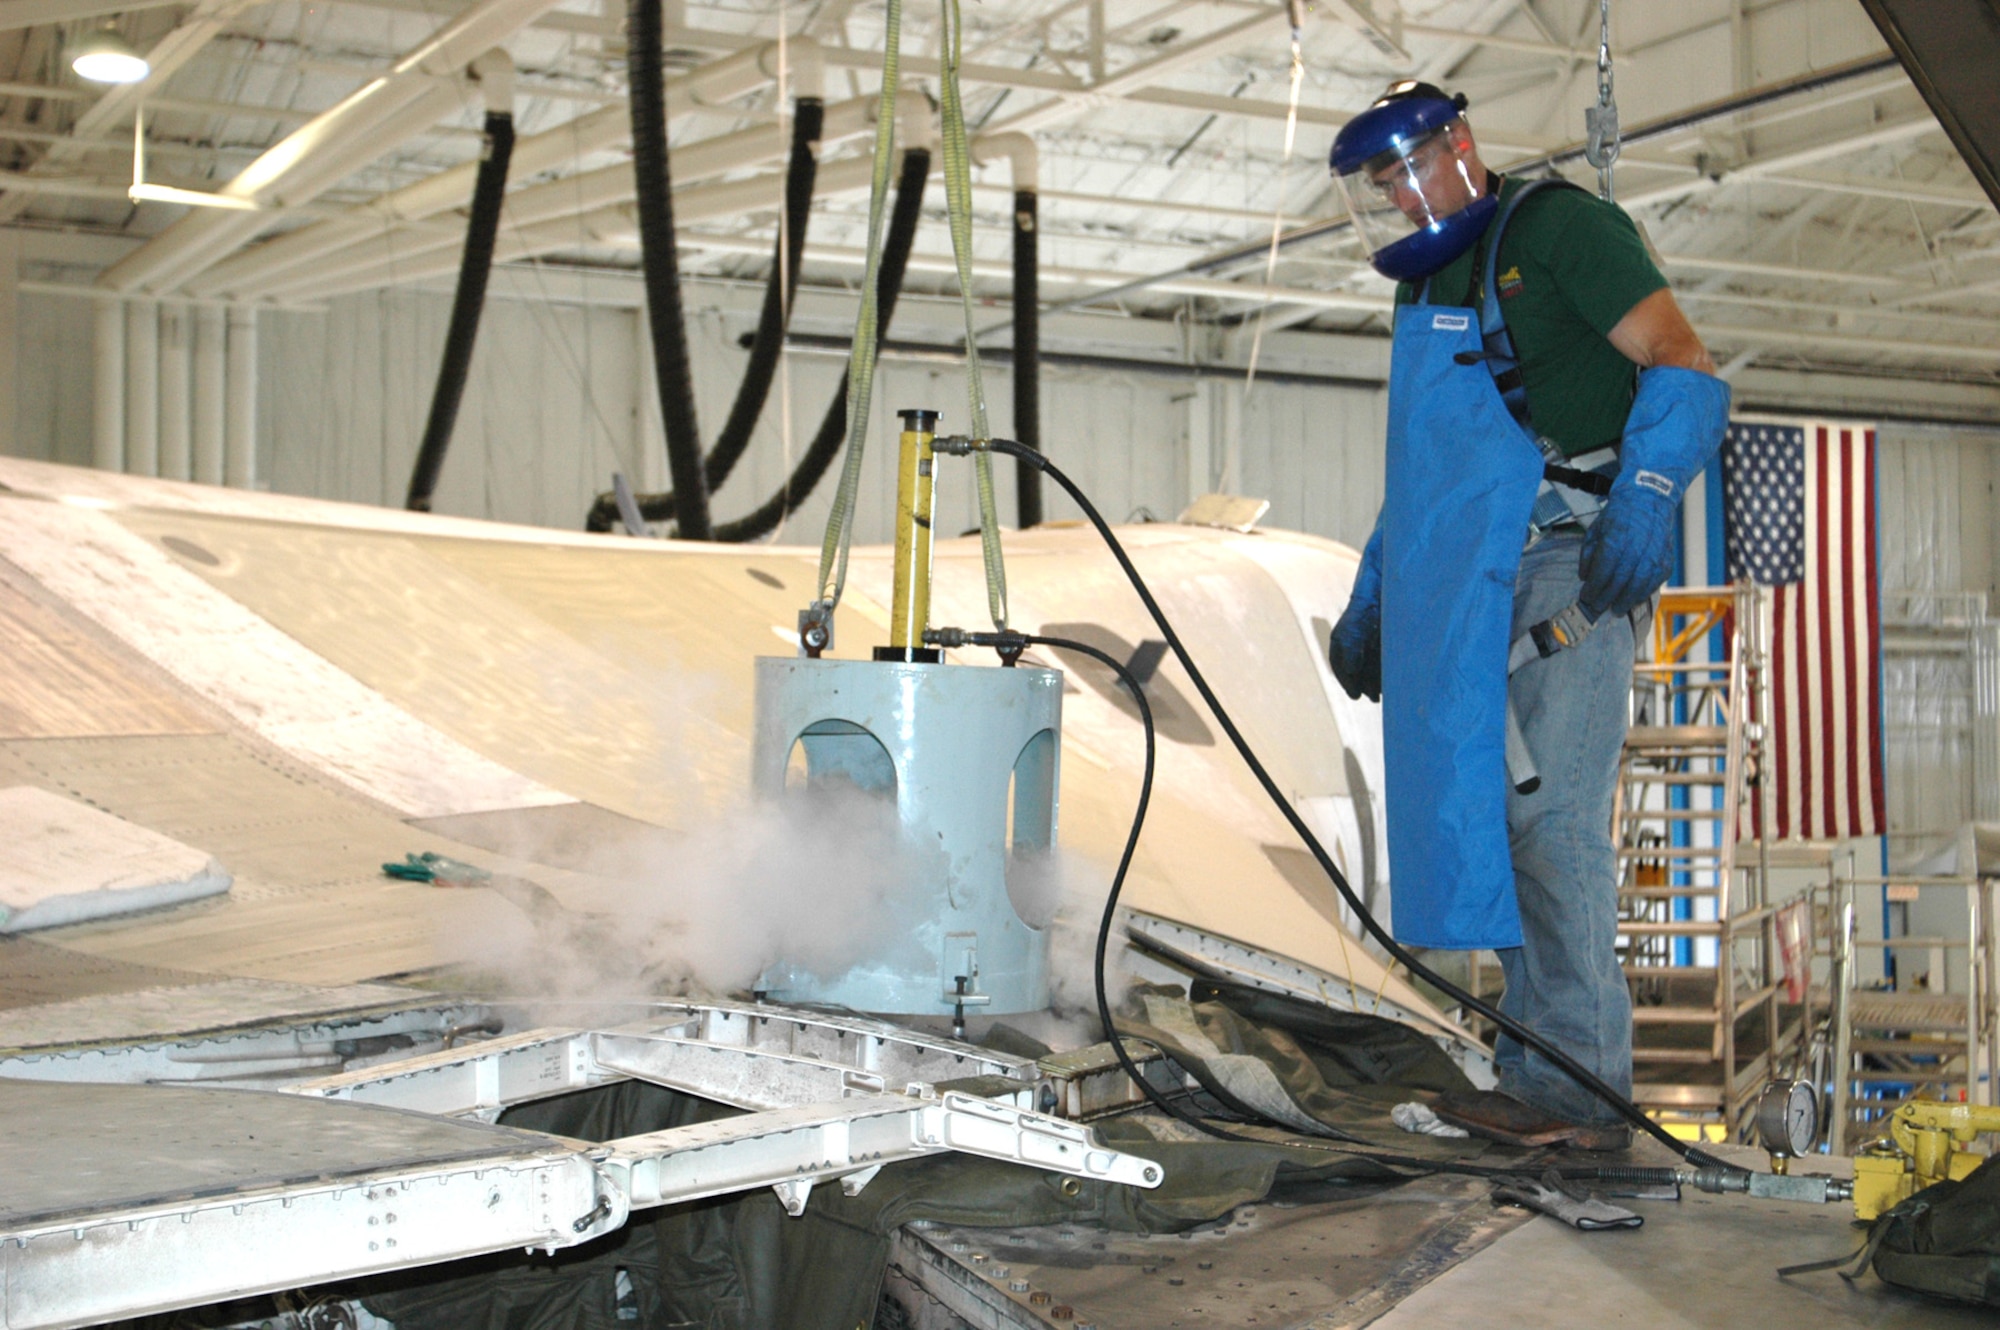 Randy Orr, 565th Aircraft Maintenance Squadron,  injects liquid nitrogen into the pivot pin on a B-1 Bomber at Tinker for maintenance. The liquid nitrogen supercools the pin, which then shrinks, becoming easier to remove from the aircraft. The pin is what allows the aircraft’s wings to pivot when in flight. With only thousandths of a micrometer of space to spare, the prototype process requires much precision. (Air Force photo by Howdy Stout)